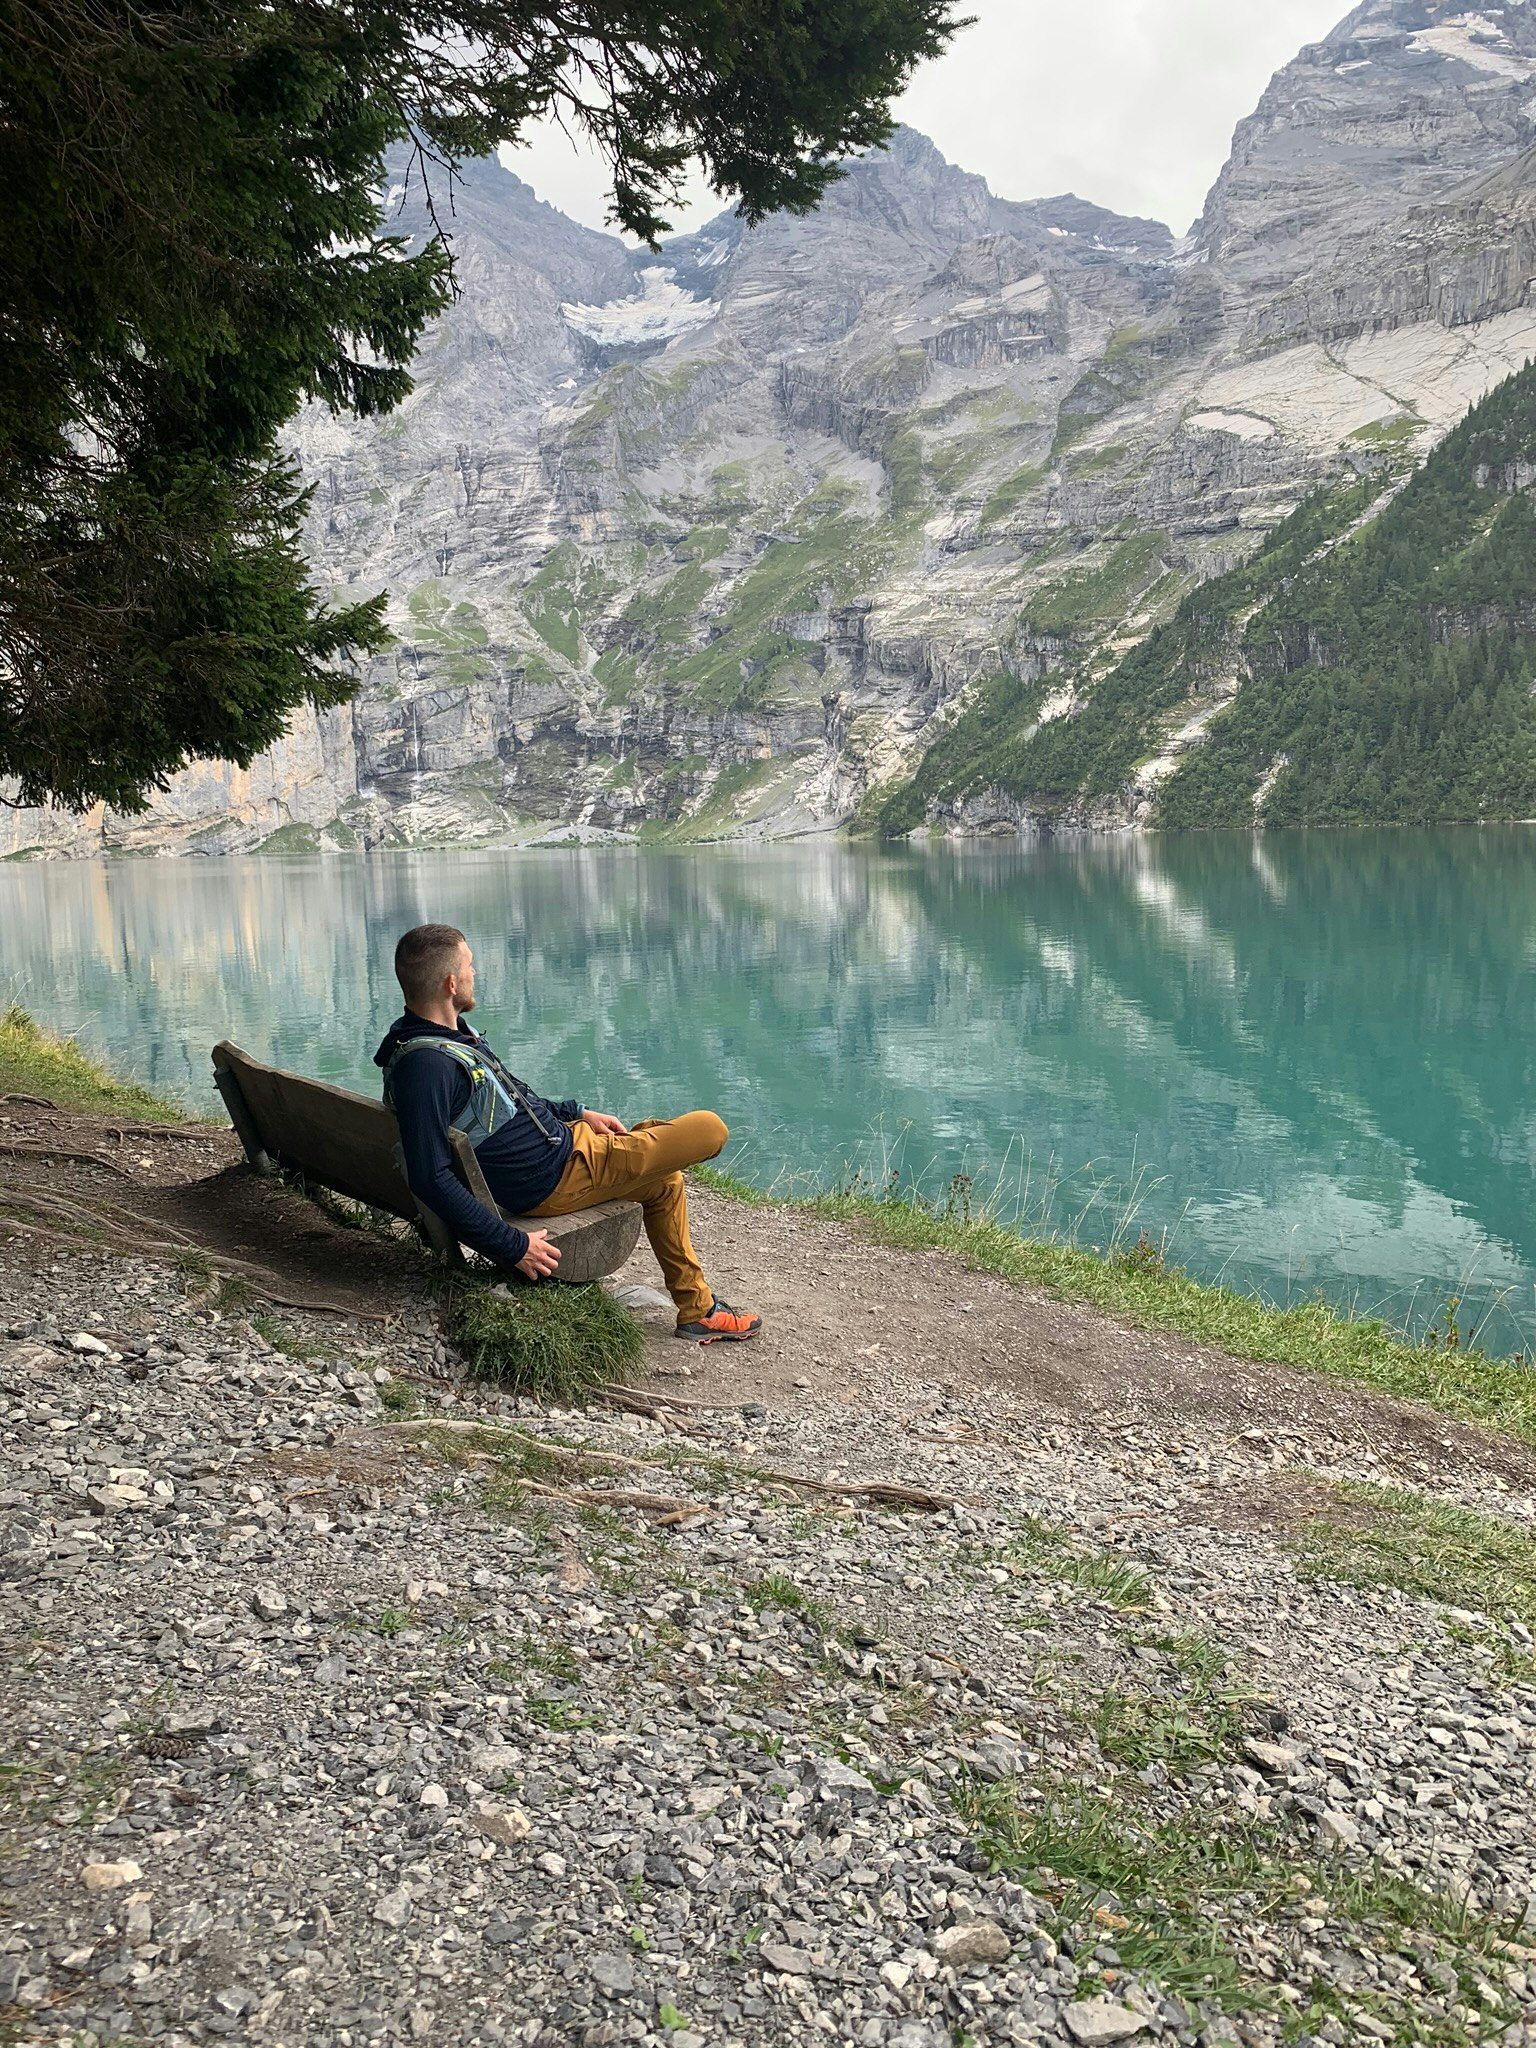 Charlie, sitting on a bench, looking away from the camera and out at a lake in the Swiss Alps